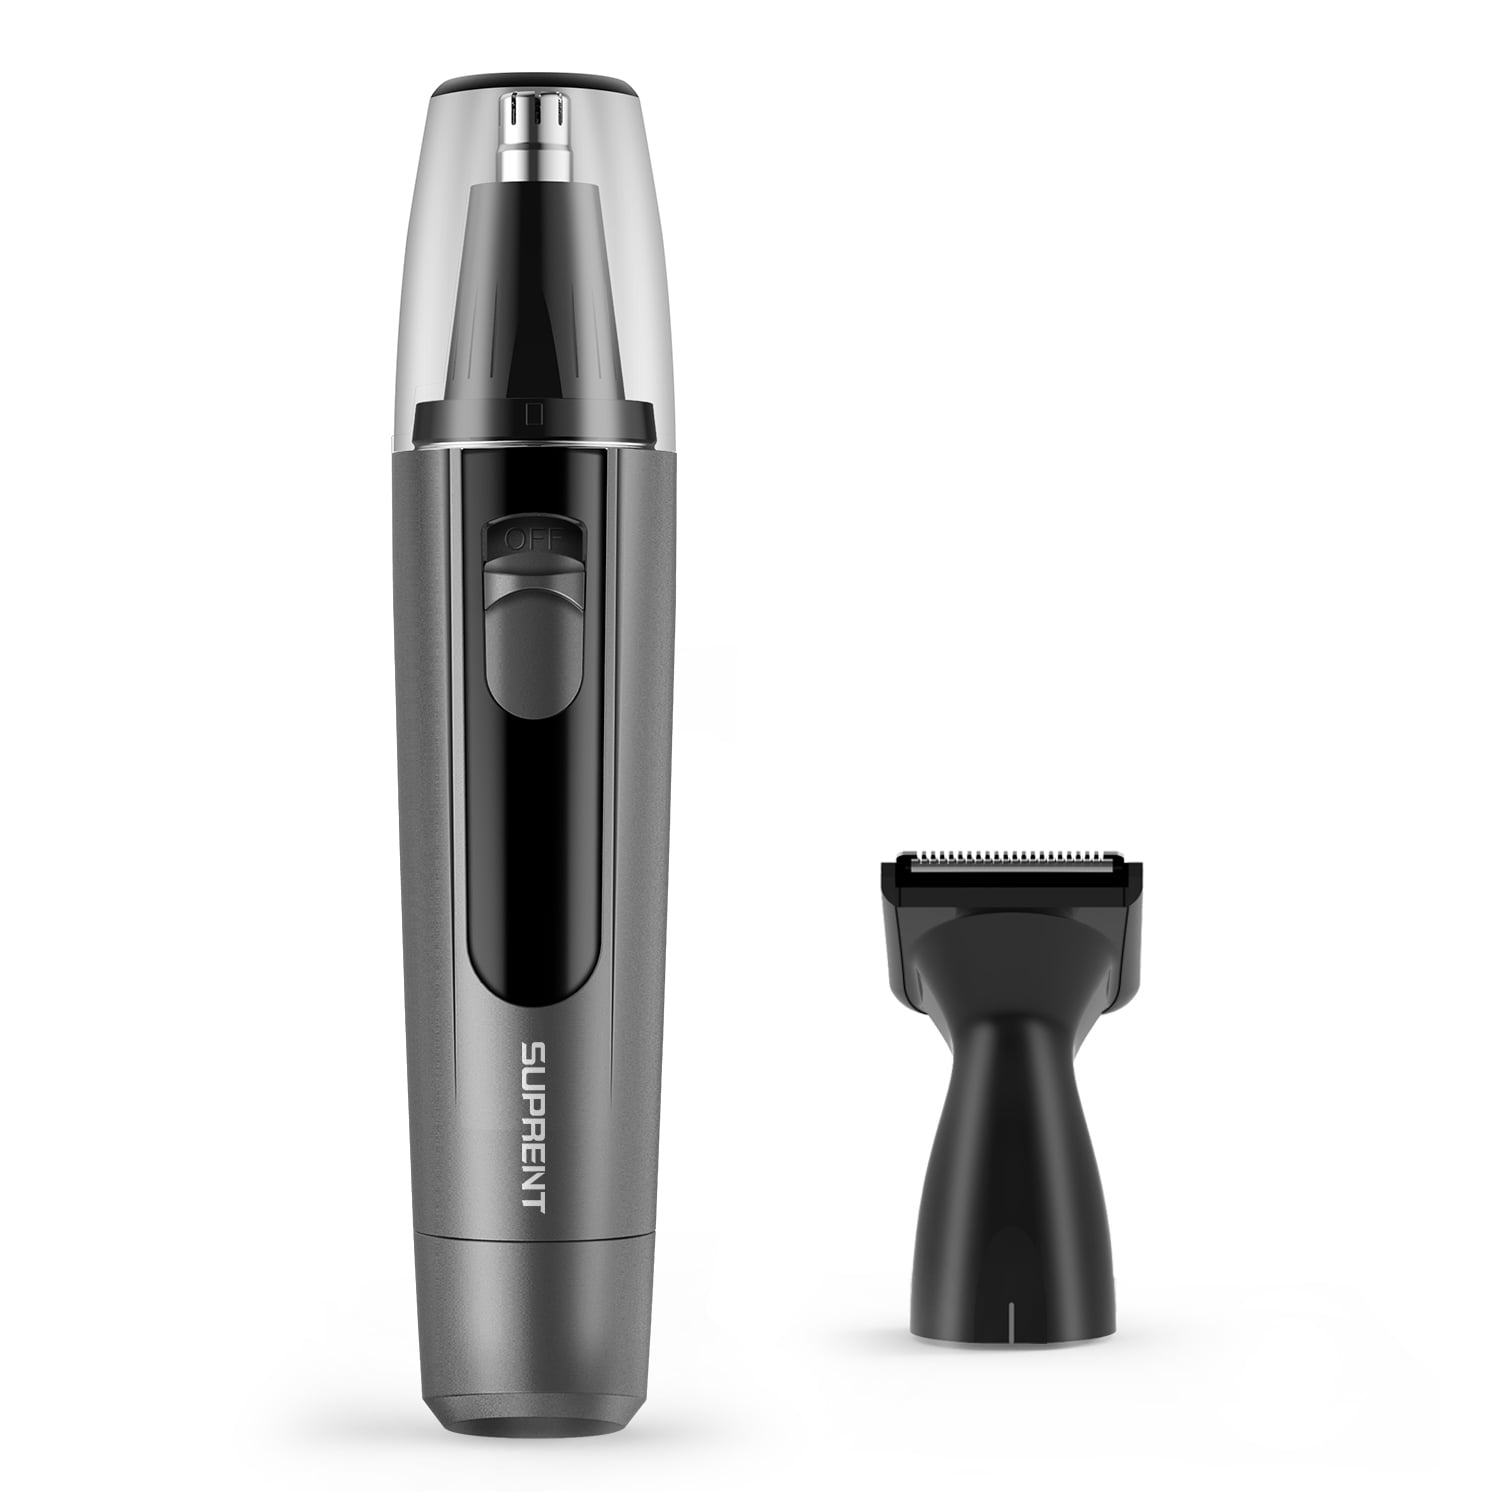 SUPRENT 2 In 1 Ear and Nose Hair Trimmer, IPX7 Waterproof Dual Blades HighSpeed Rotating Facial